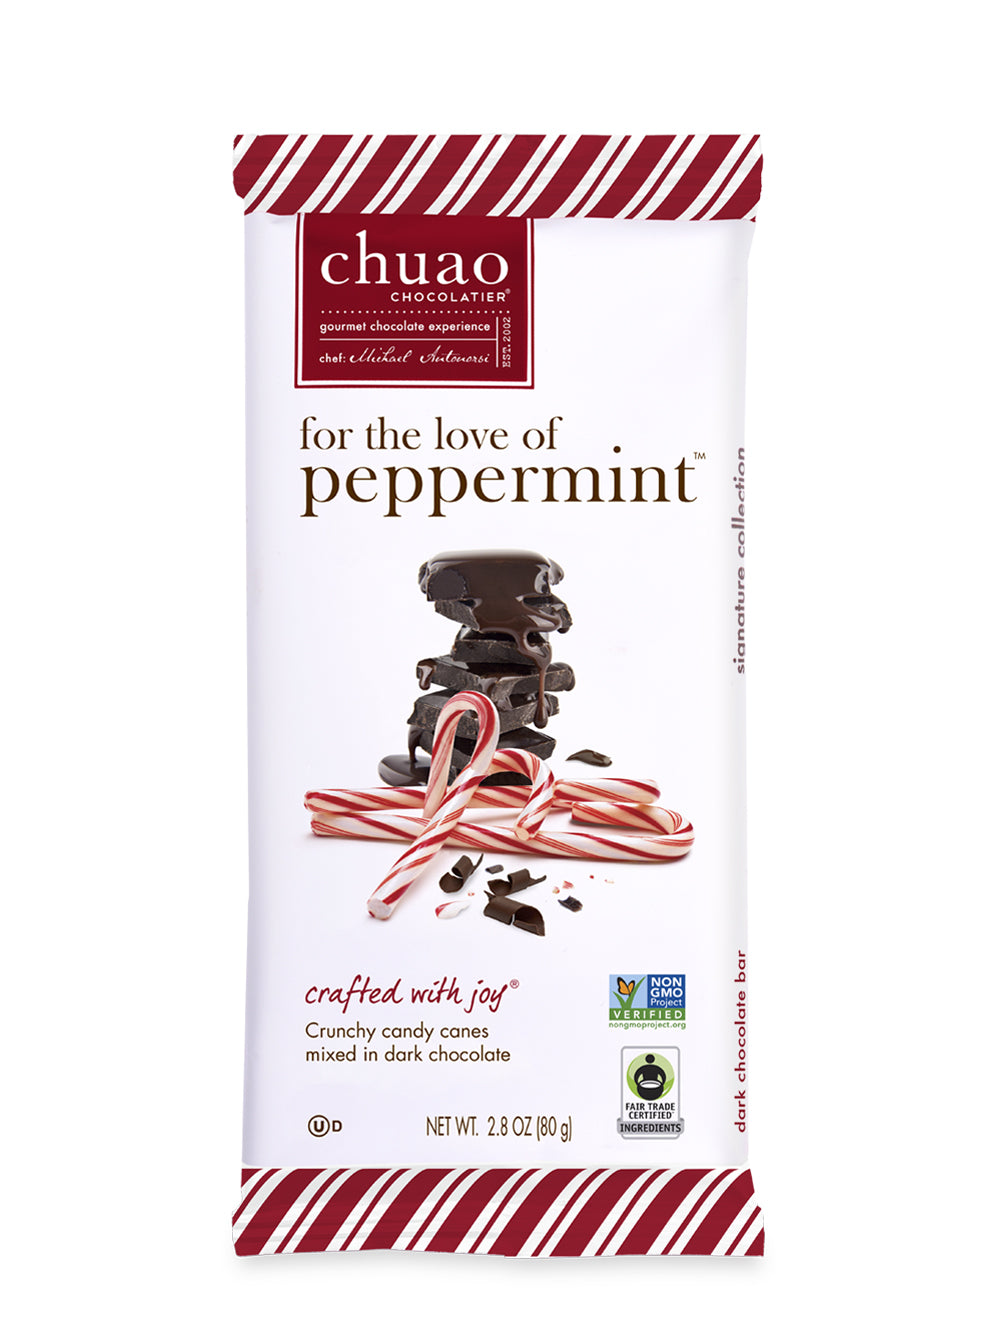 For the Love of Peppermint Chocolate Bar